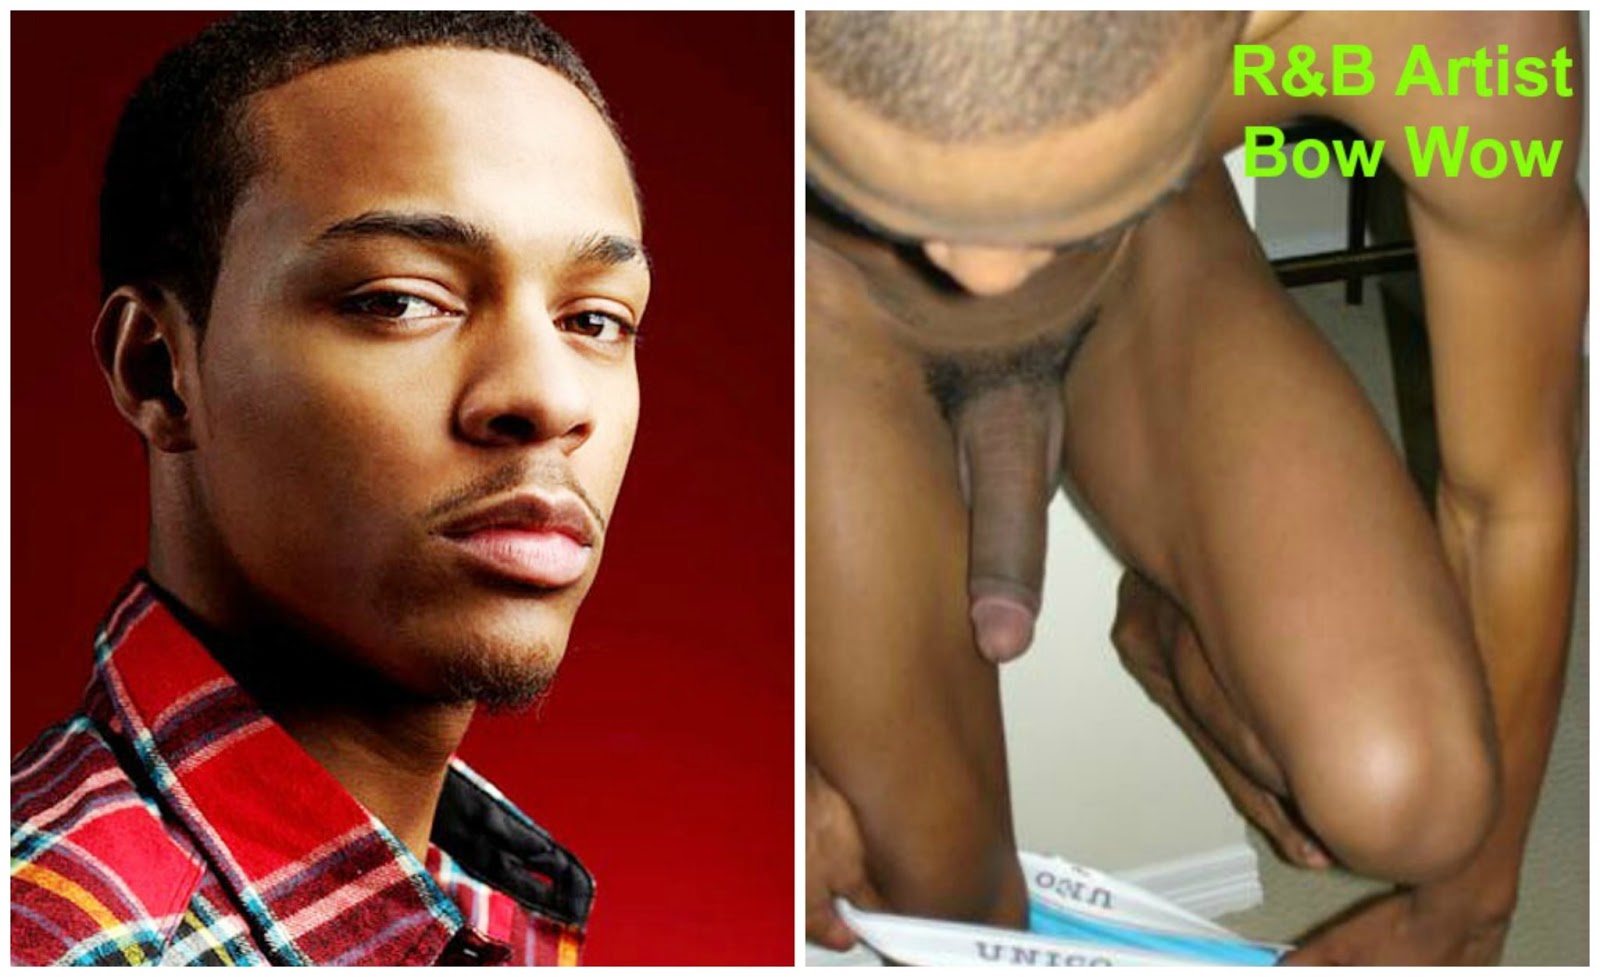 Bow wow gay sex tape